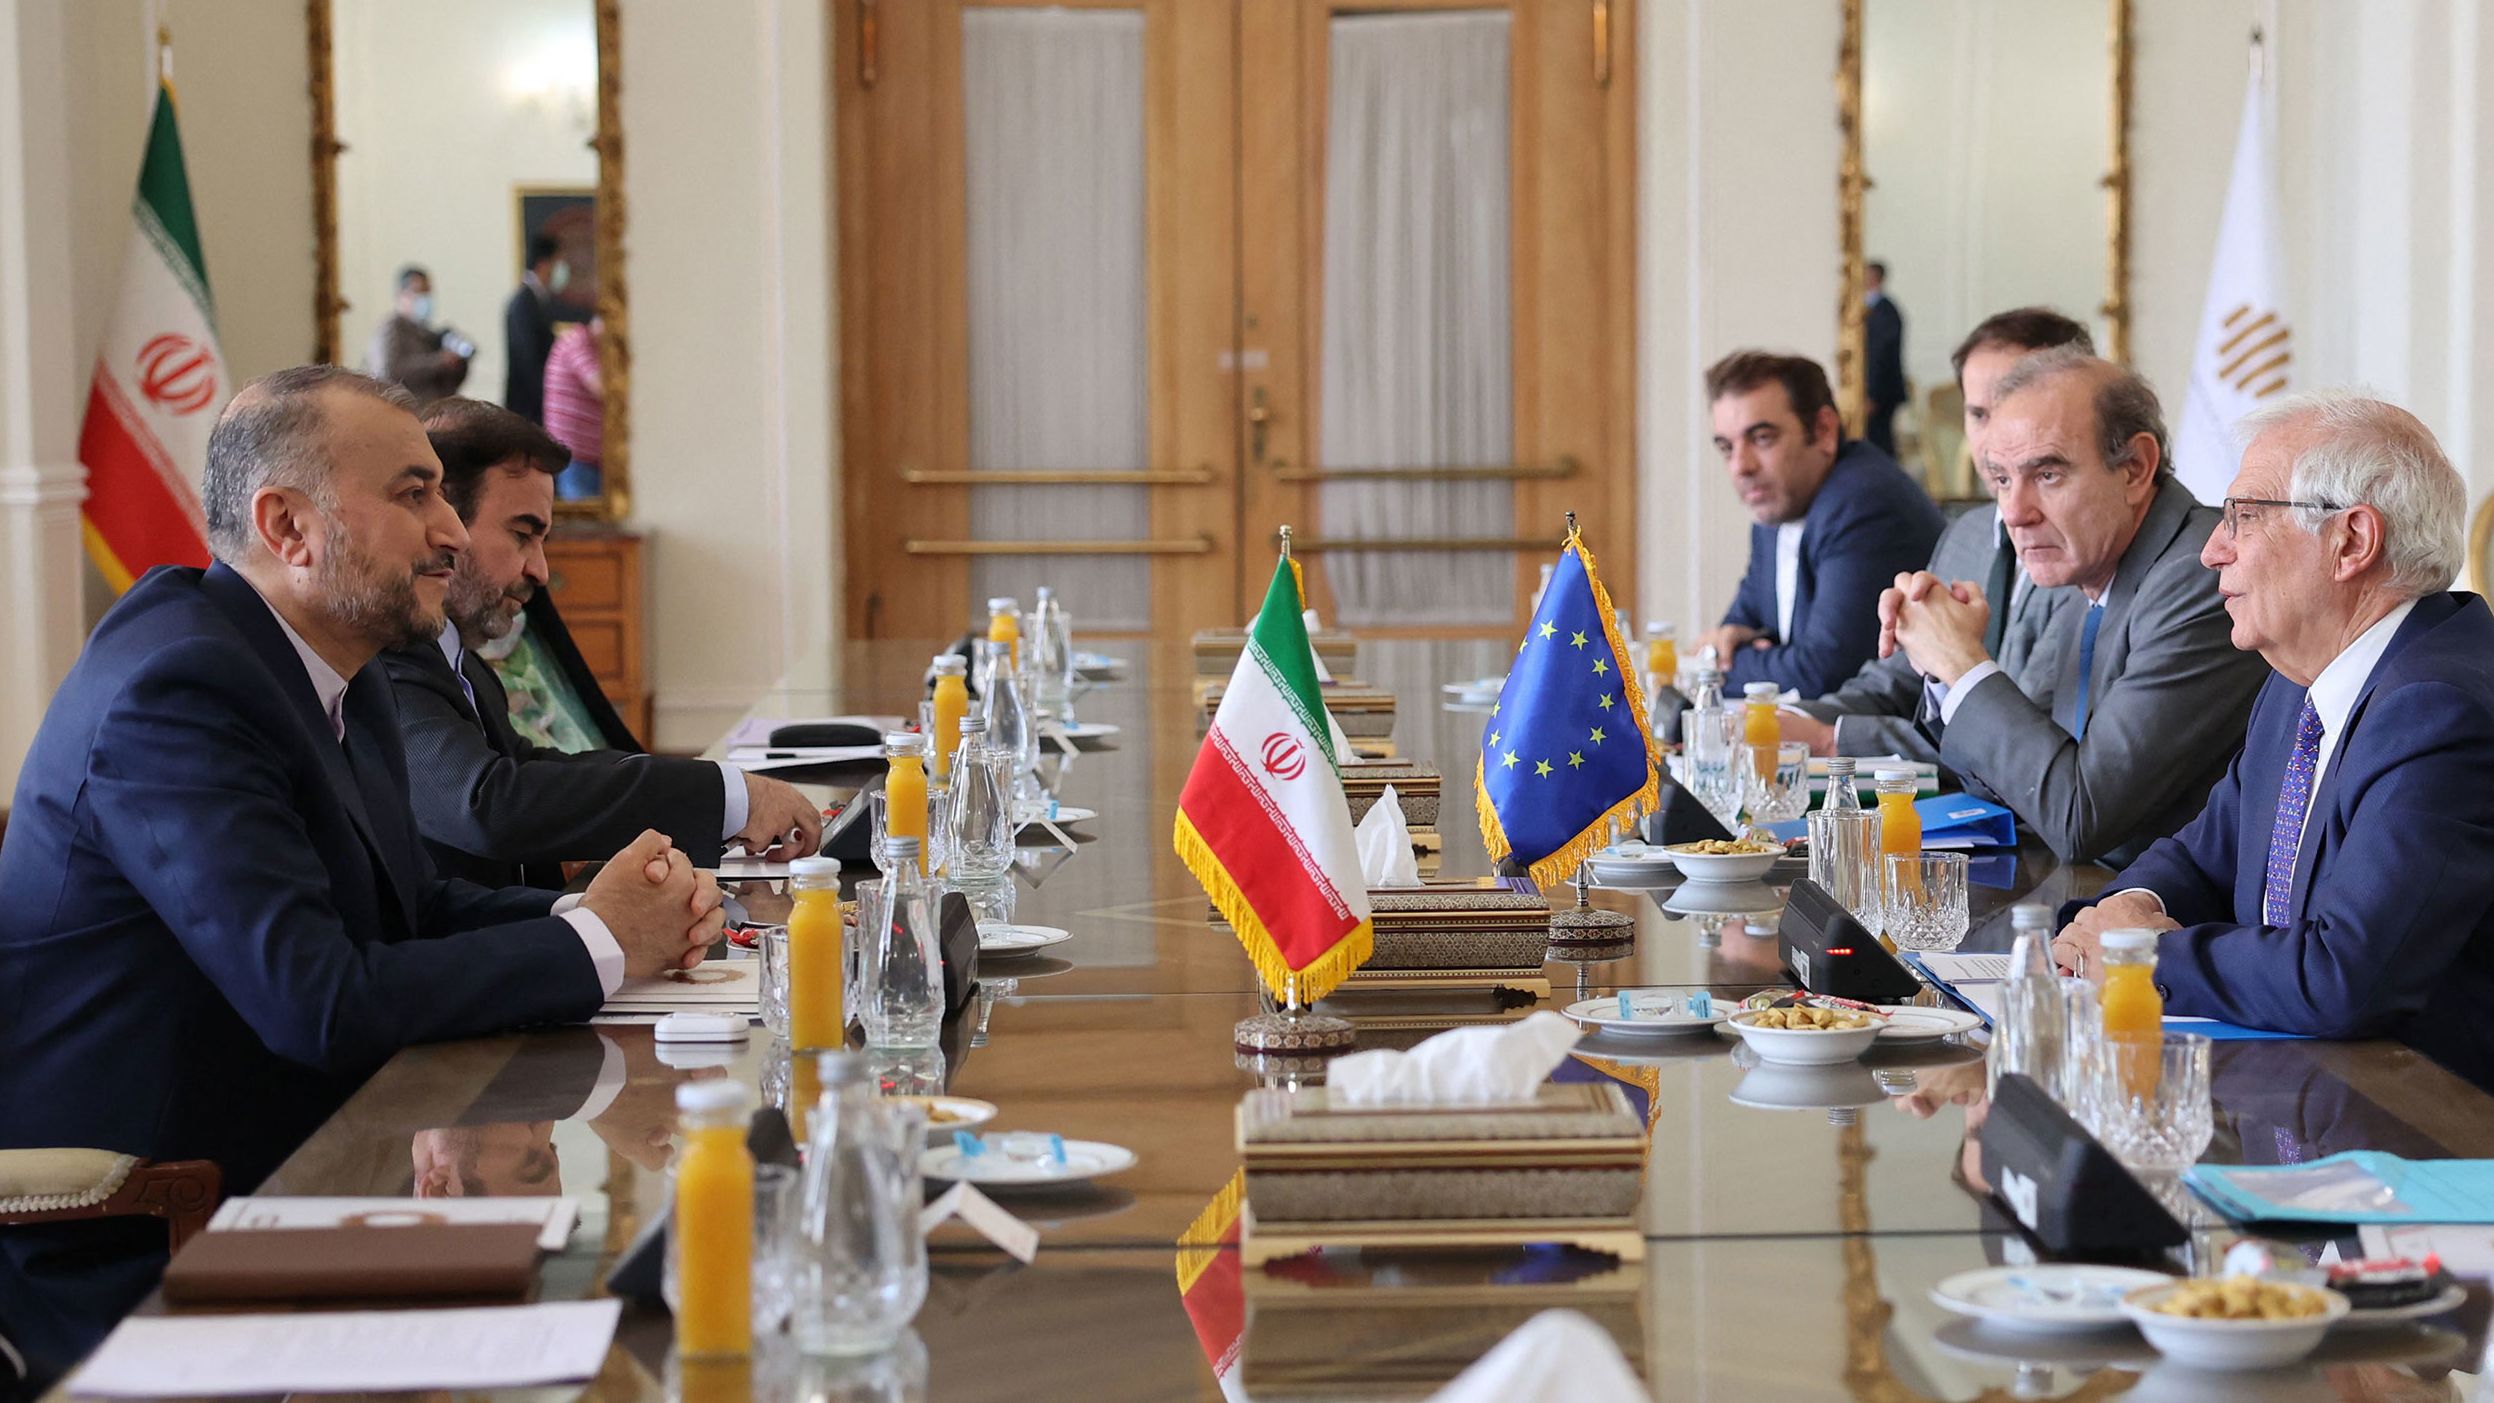 Iran's Foreign Minister Hossein Amir-Abdollahian (L) meets Josep Borell, the High Representative of the European Union for Foreign Affairs and Security Policy (R), and Deputy Secretary General of the European External Action Service Enrique Mora (2nd-R) at the foreign ministry headquarters in Iran's capital Tehran on June 25.